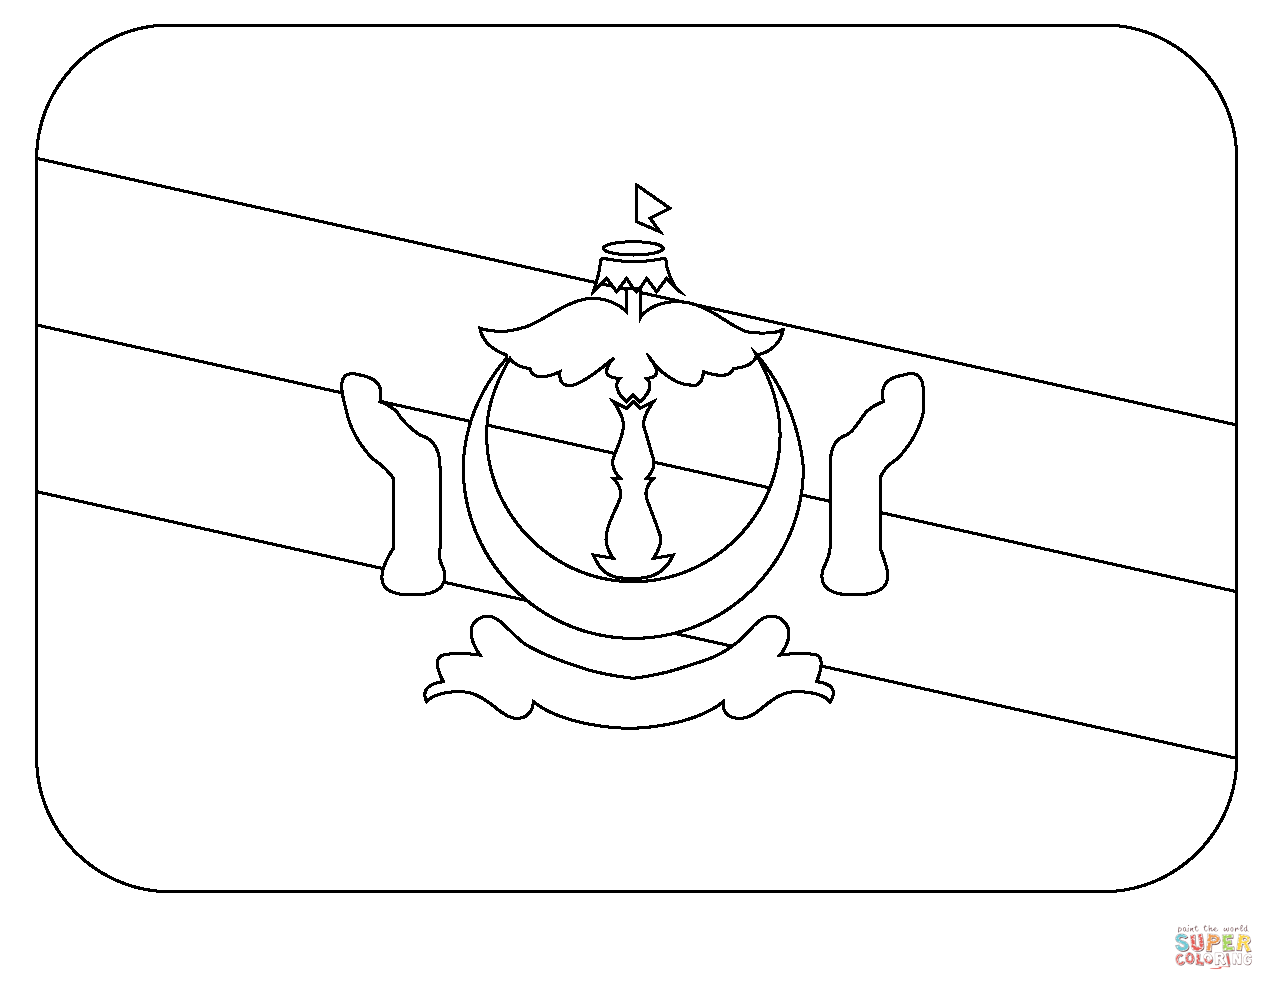 Flag of brunei emoji coloring page free printable coloring pages